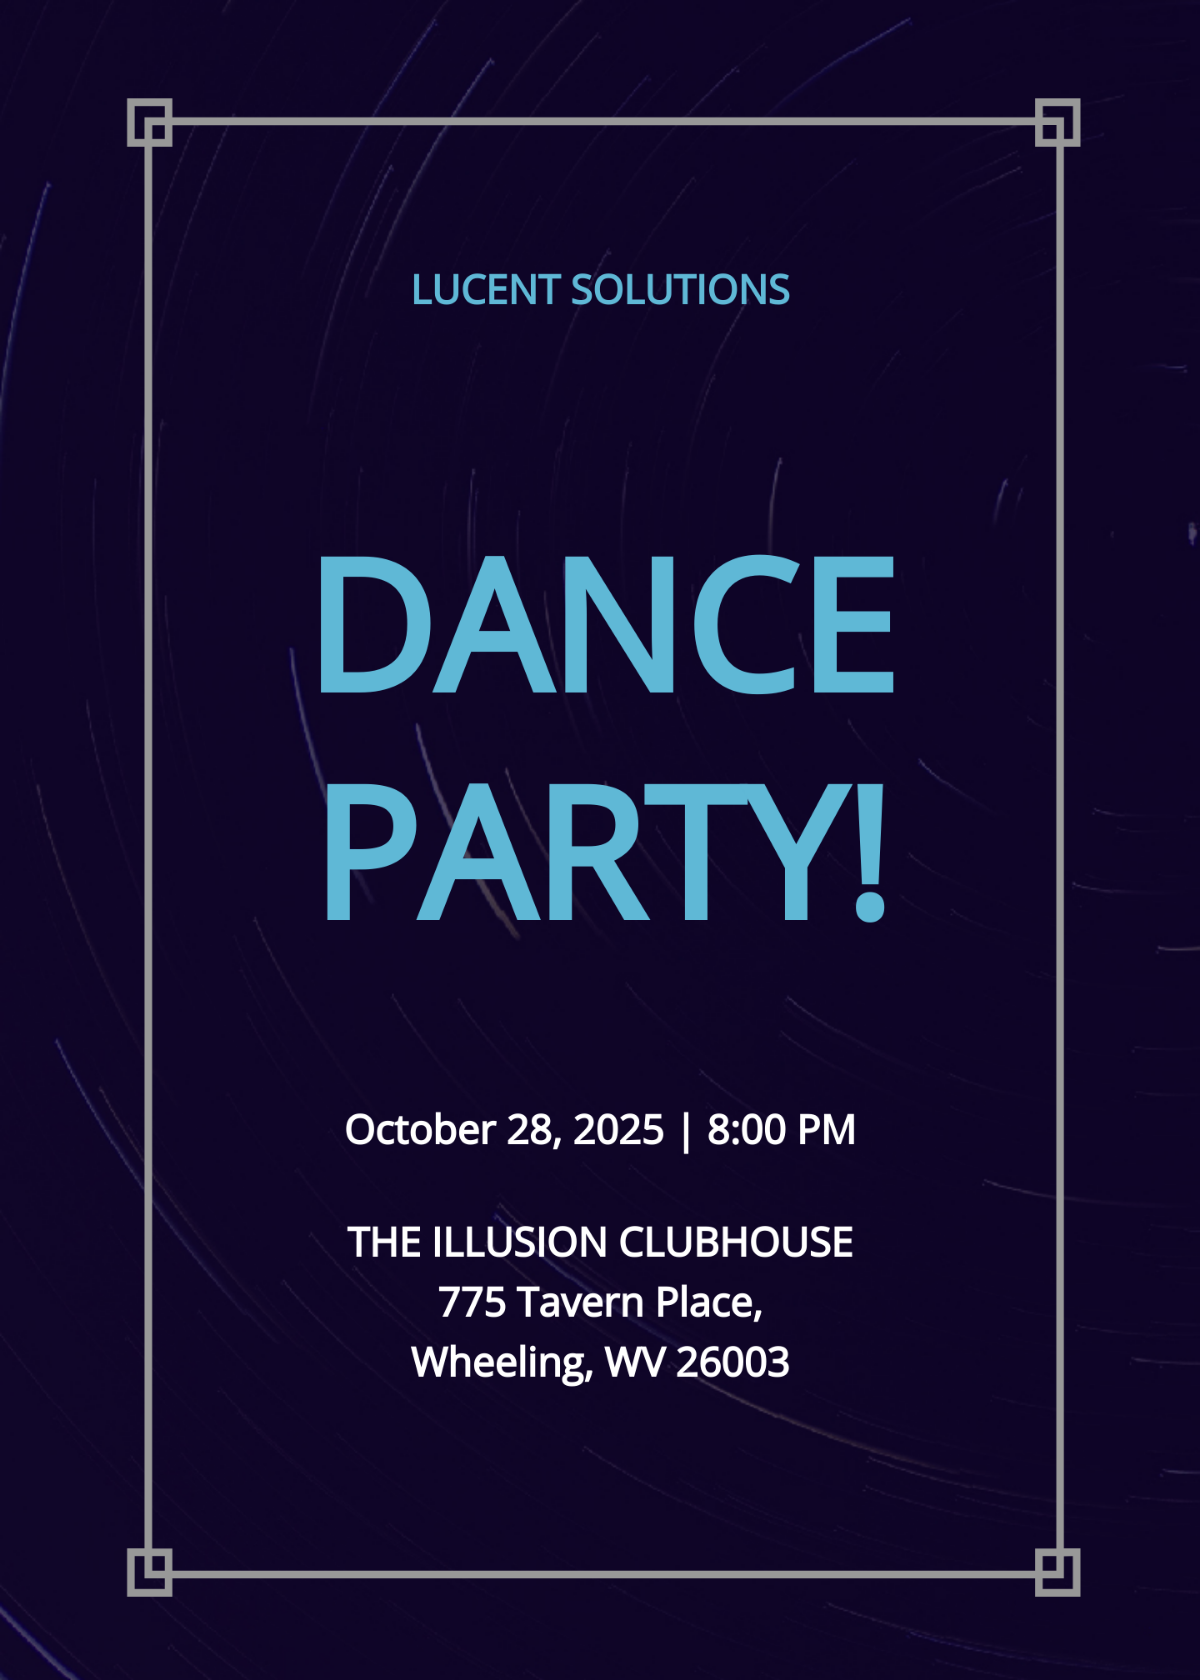 Free Dance Party Invitation Template